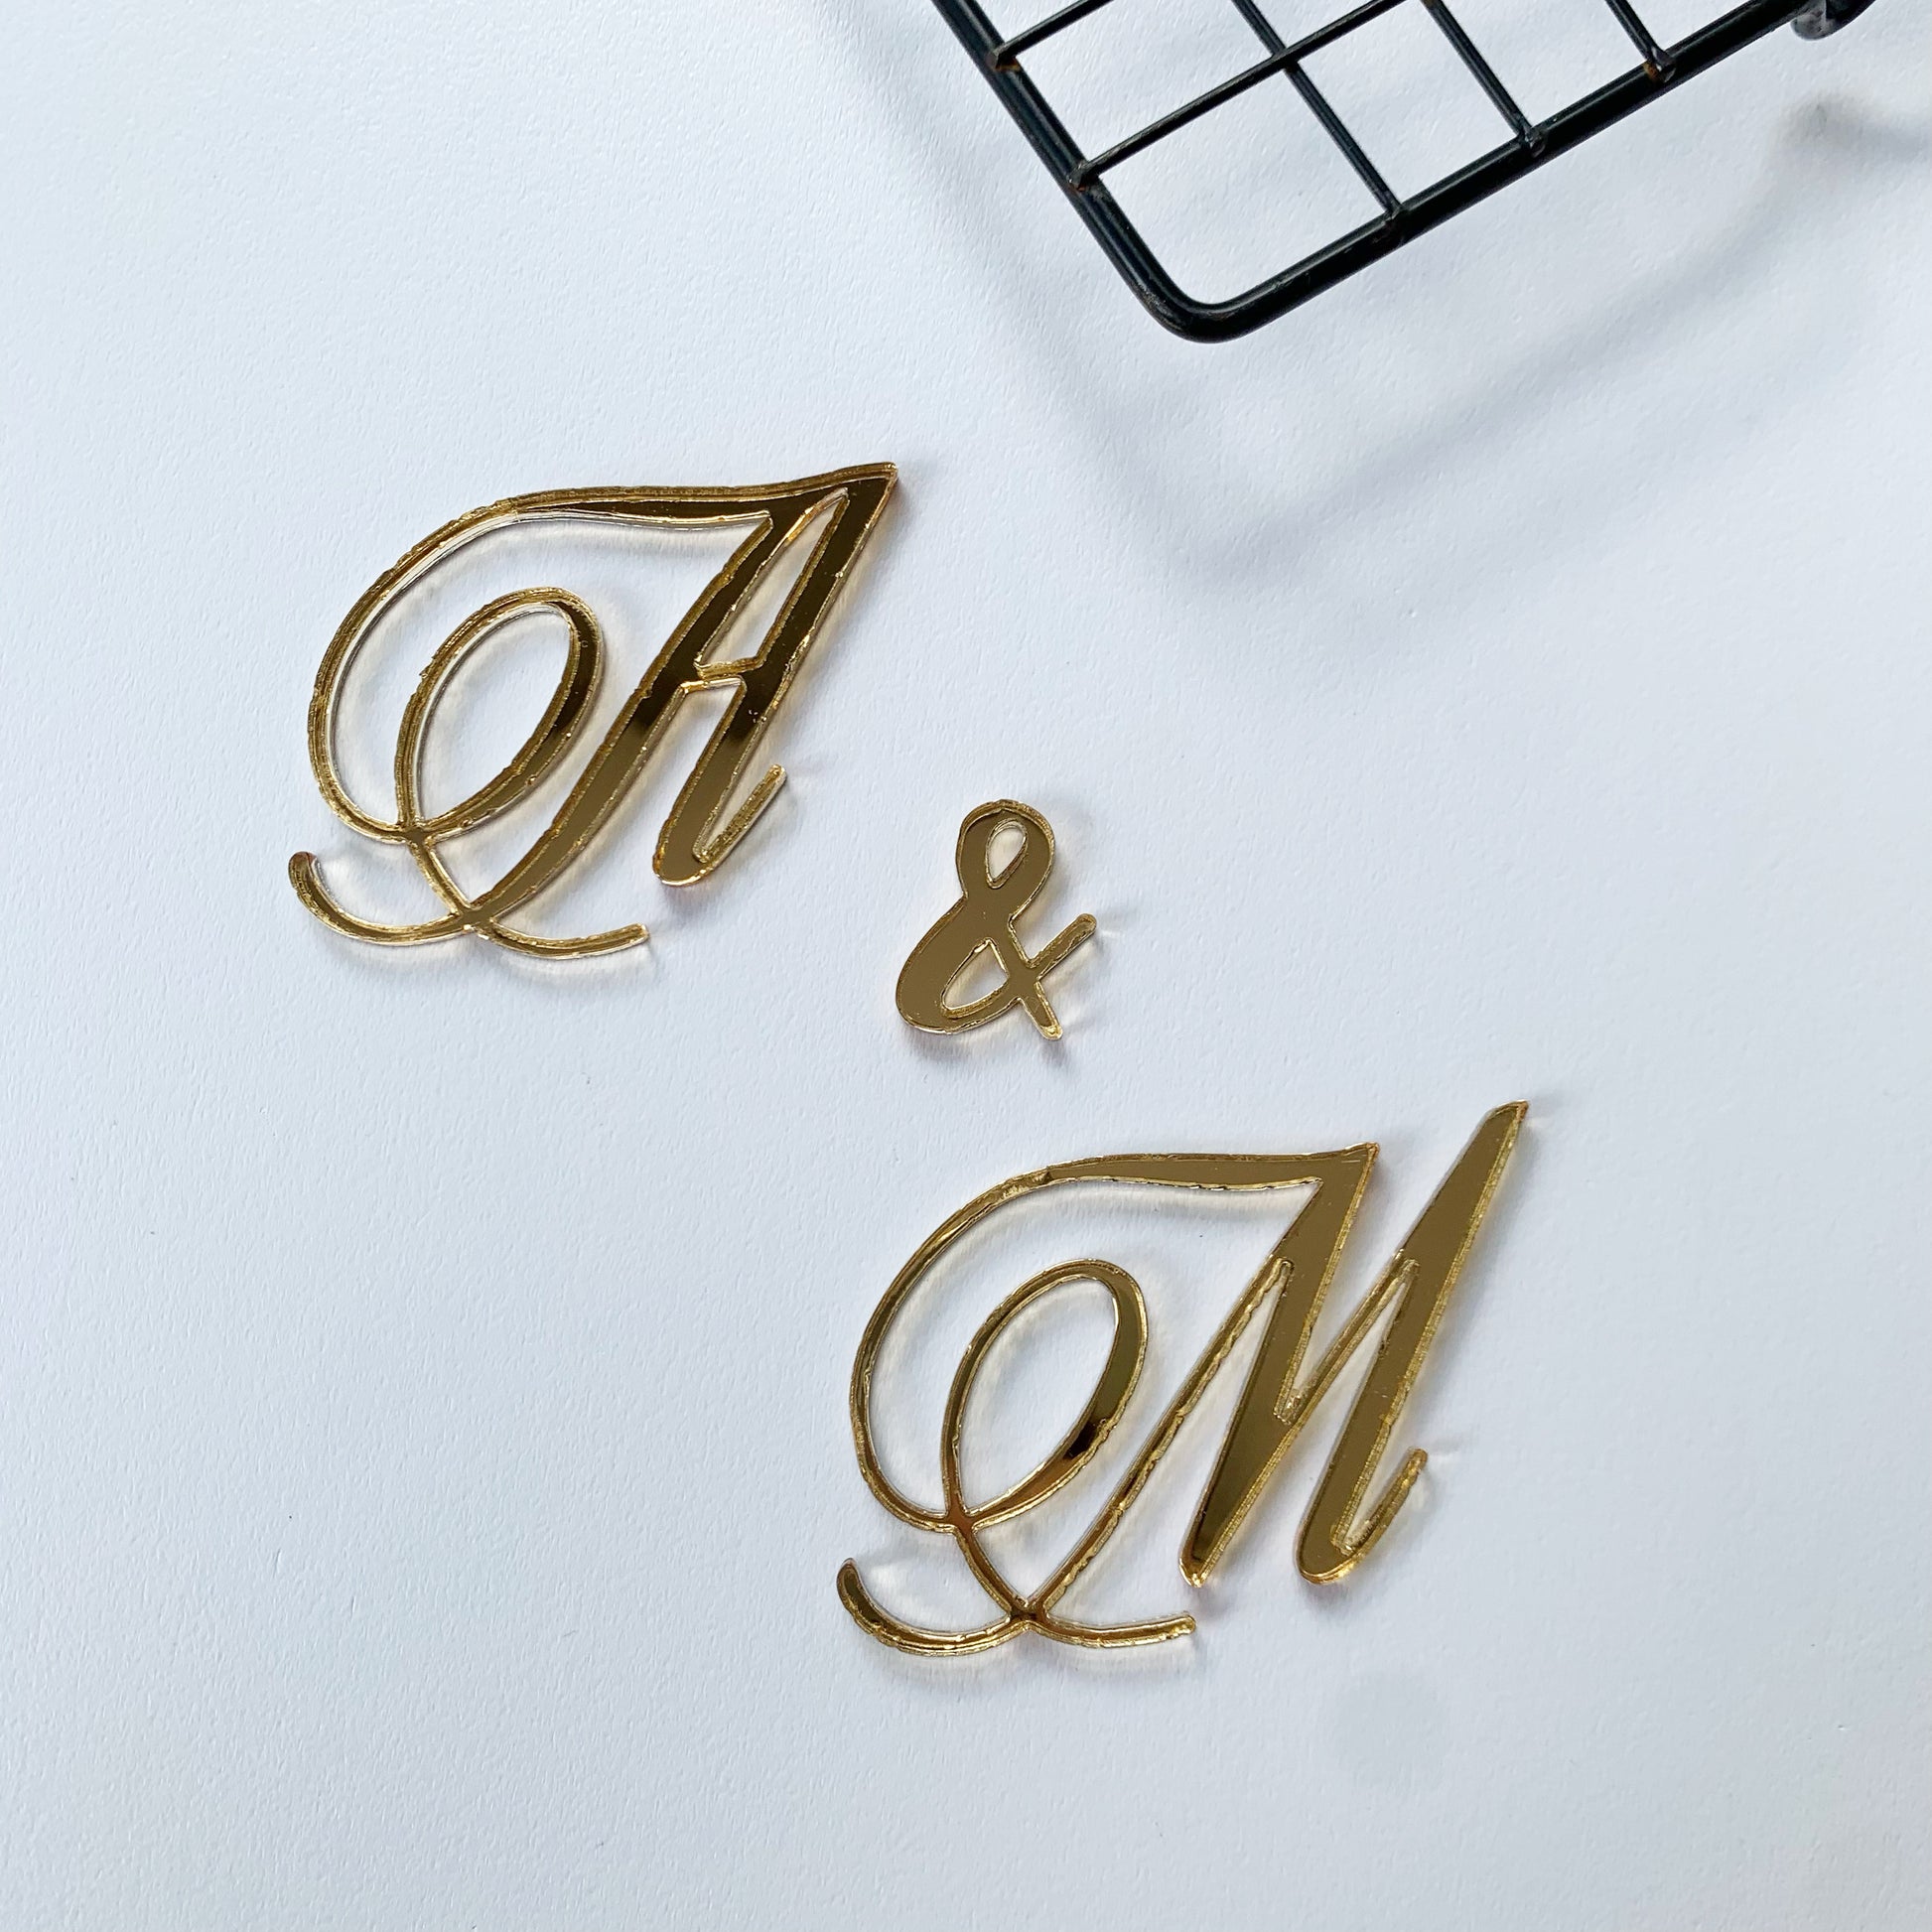 Wedding Custom Initial names Cake Charm - in gold mirror acrylic MEG cookie cutters